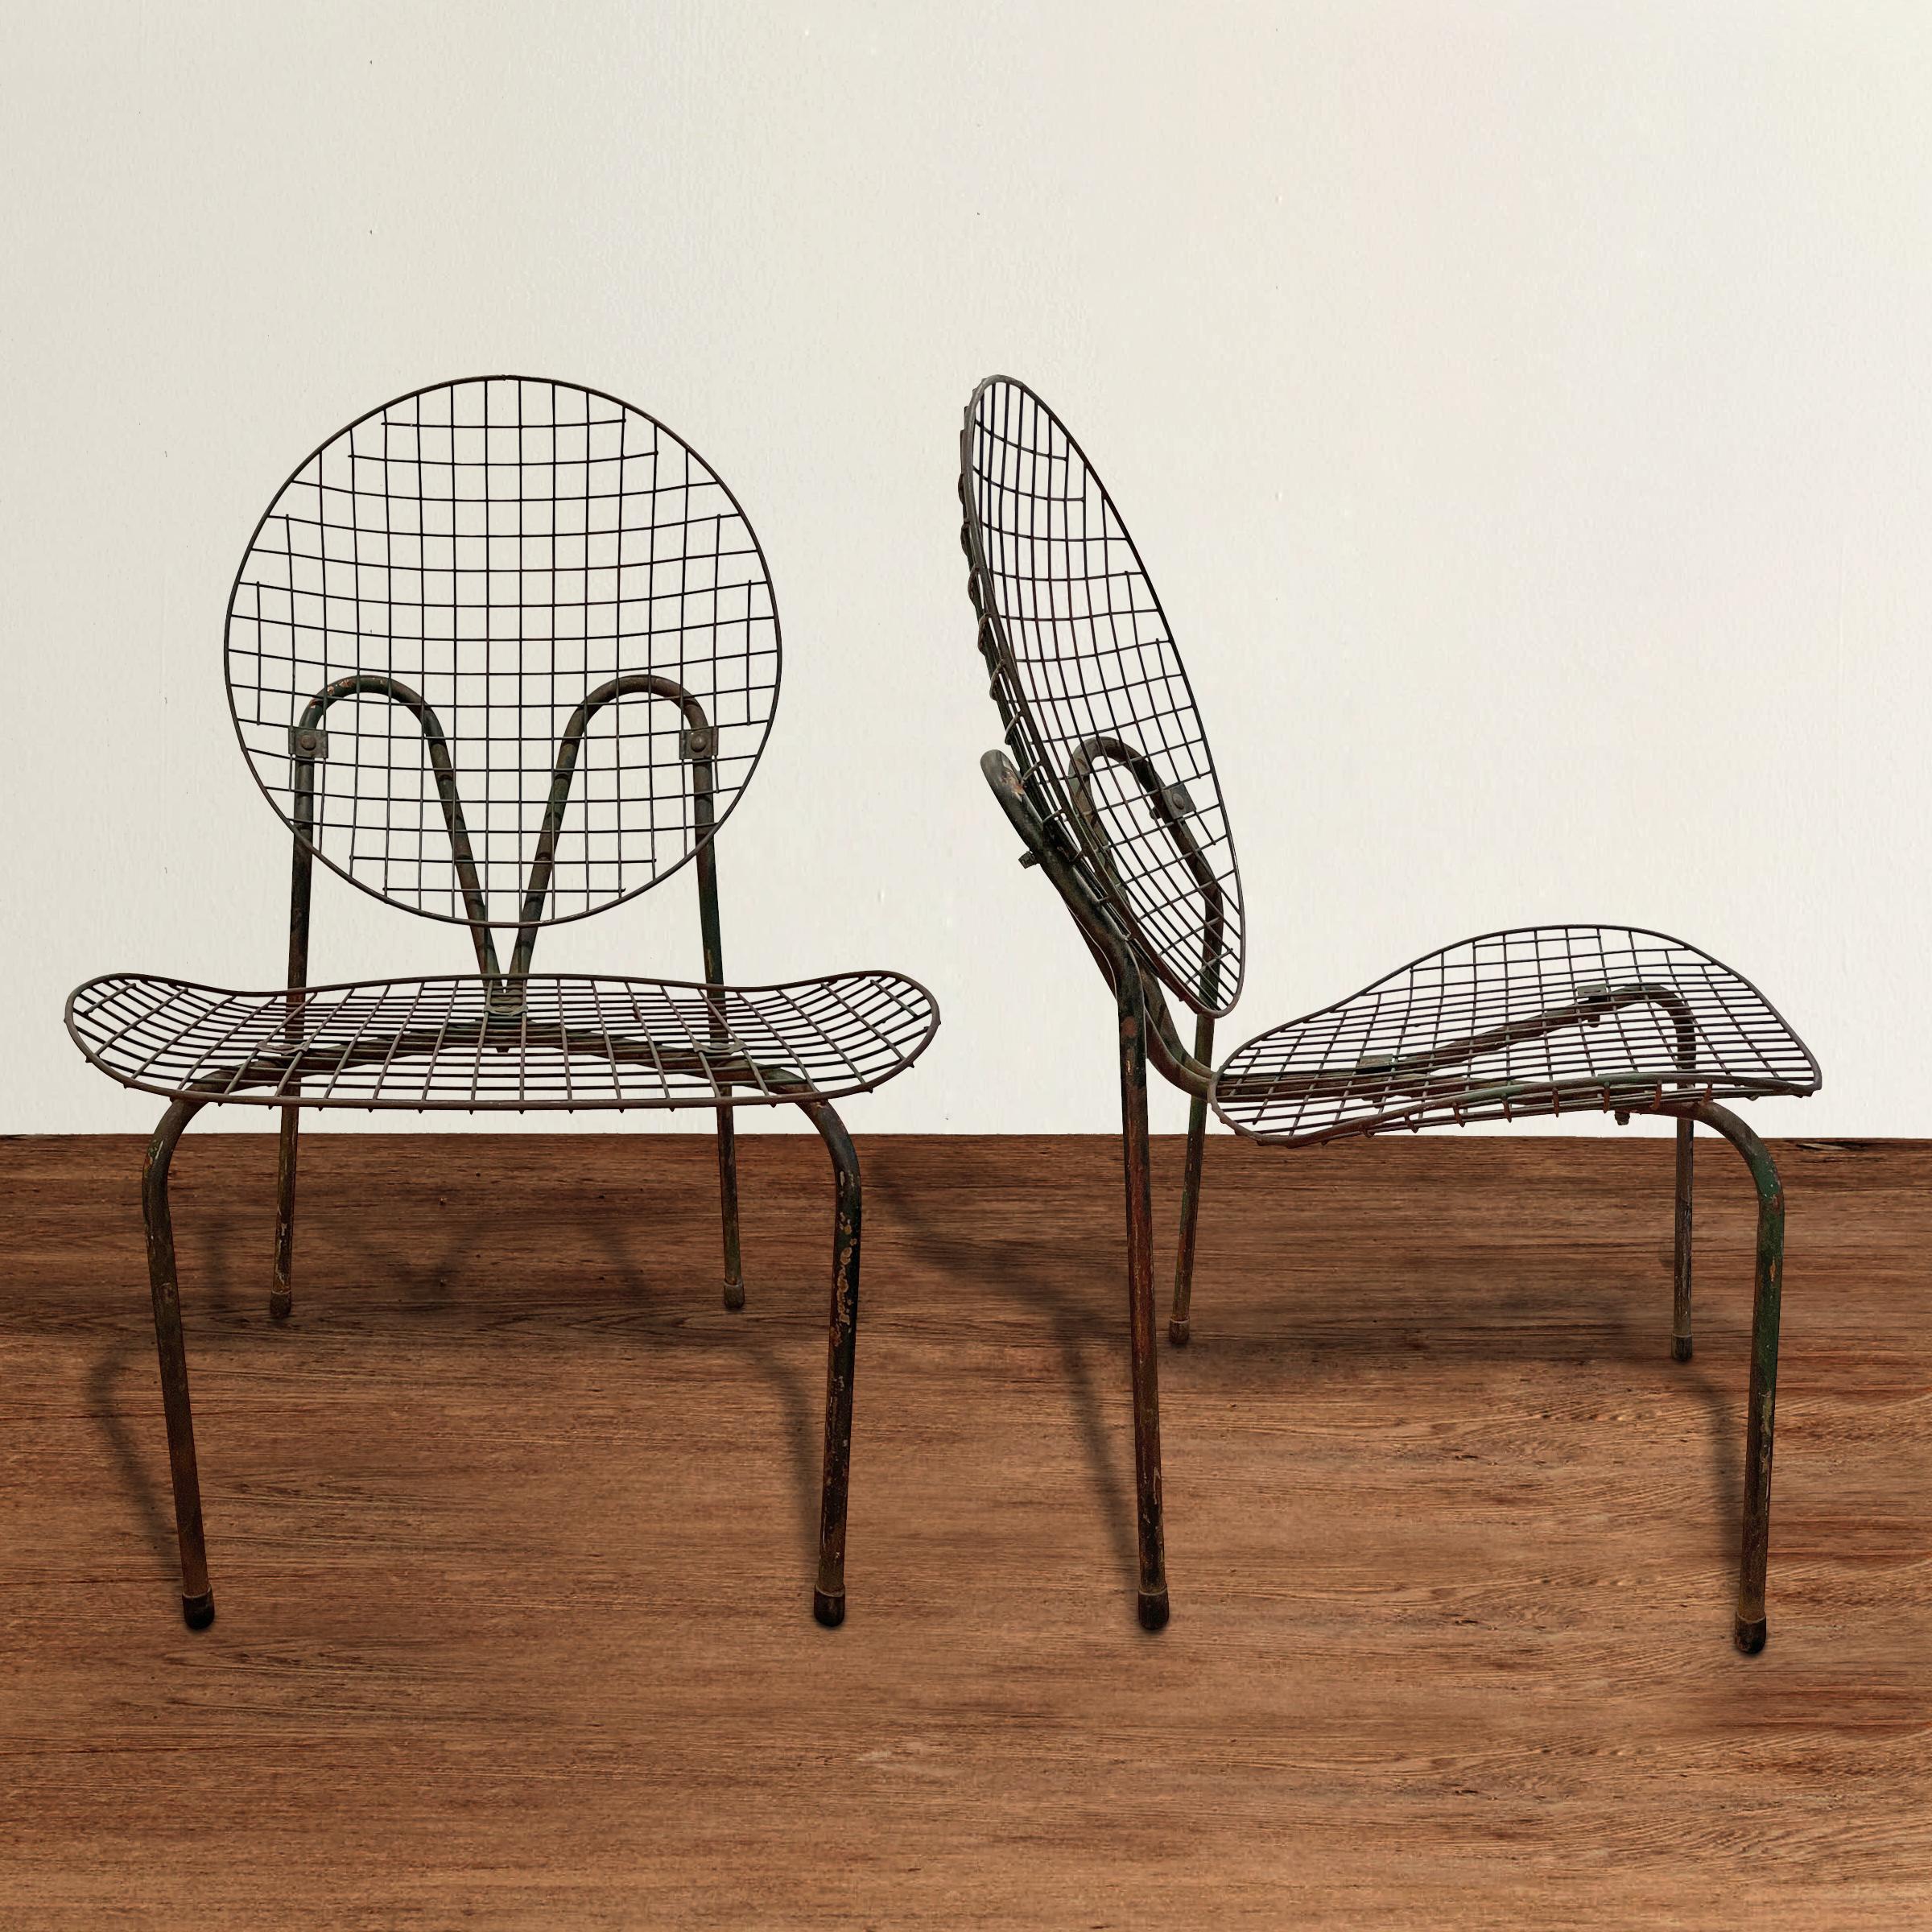 A chic and sculptural pair of early 20th century French garden chairs with bent tubular frames and wide wire mesh backs and seats. Chairs are perfectly comfortable as they are, but they would be beautiful with custom cushions as well. Also work